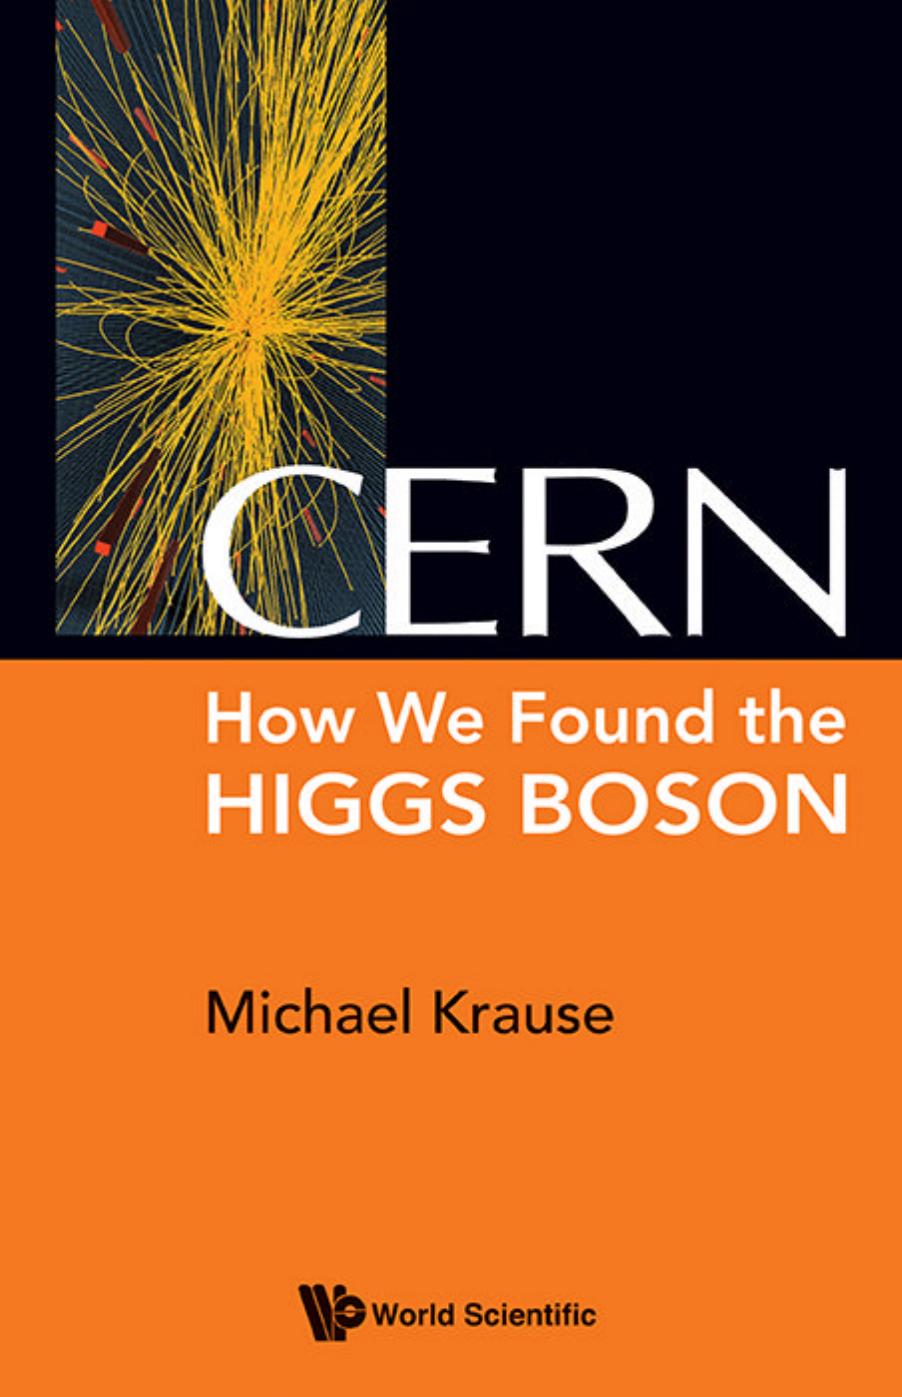 CERN: How We Found the Higgs Boson